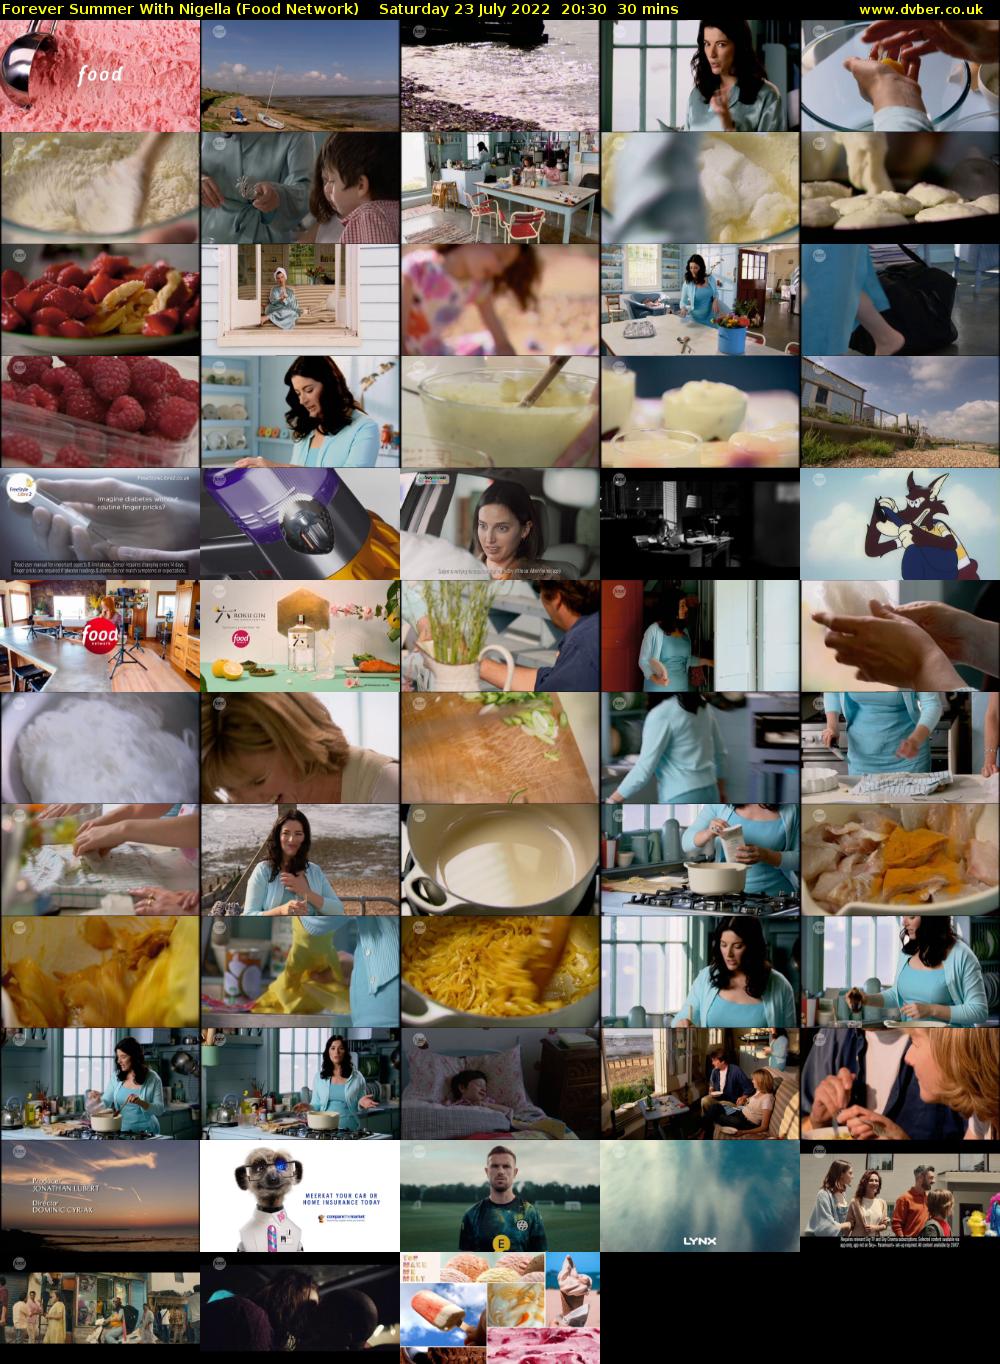 Forever Summer with Nigella (Food Network) Saturday 23 July 2022 20:30 - 21:00